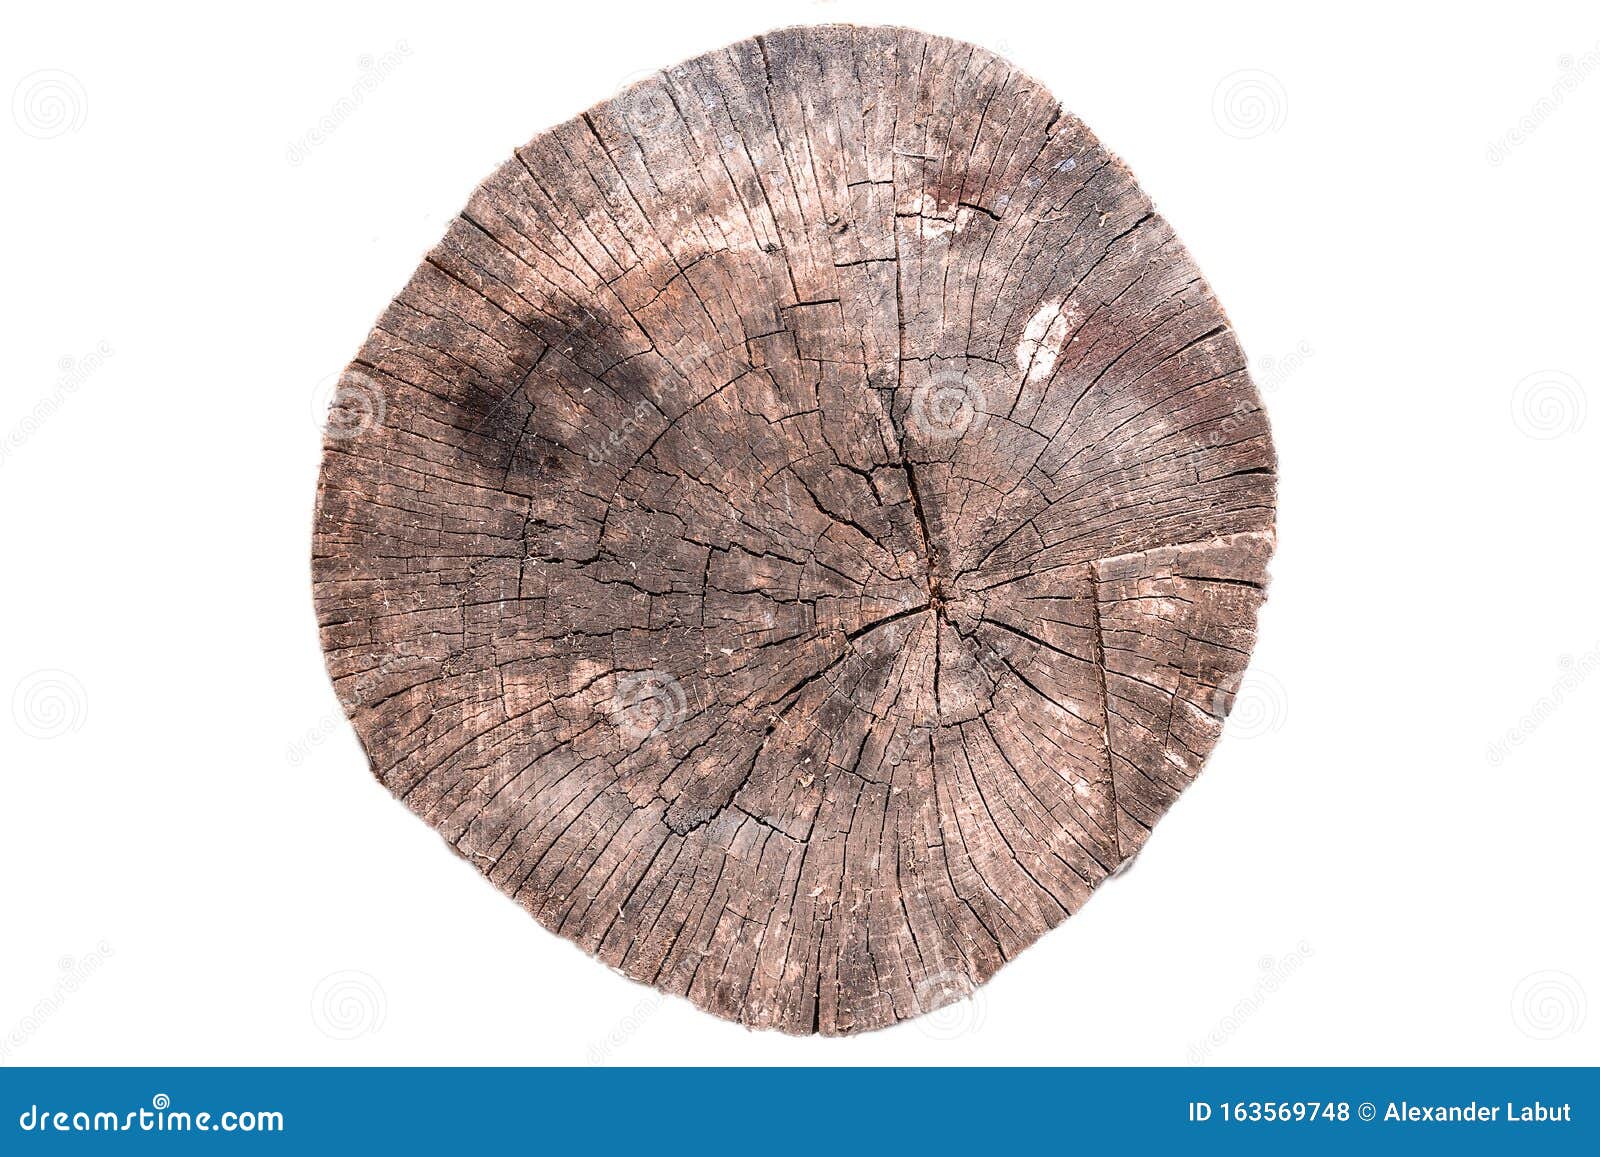 Tough Trees and Growth Rings | Brooks Mendell